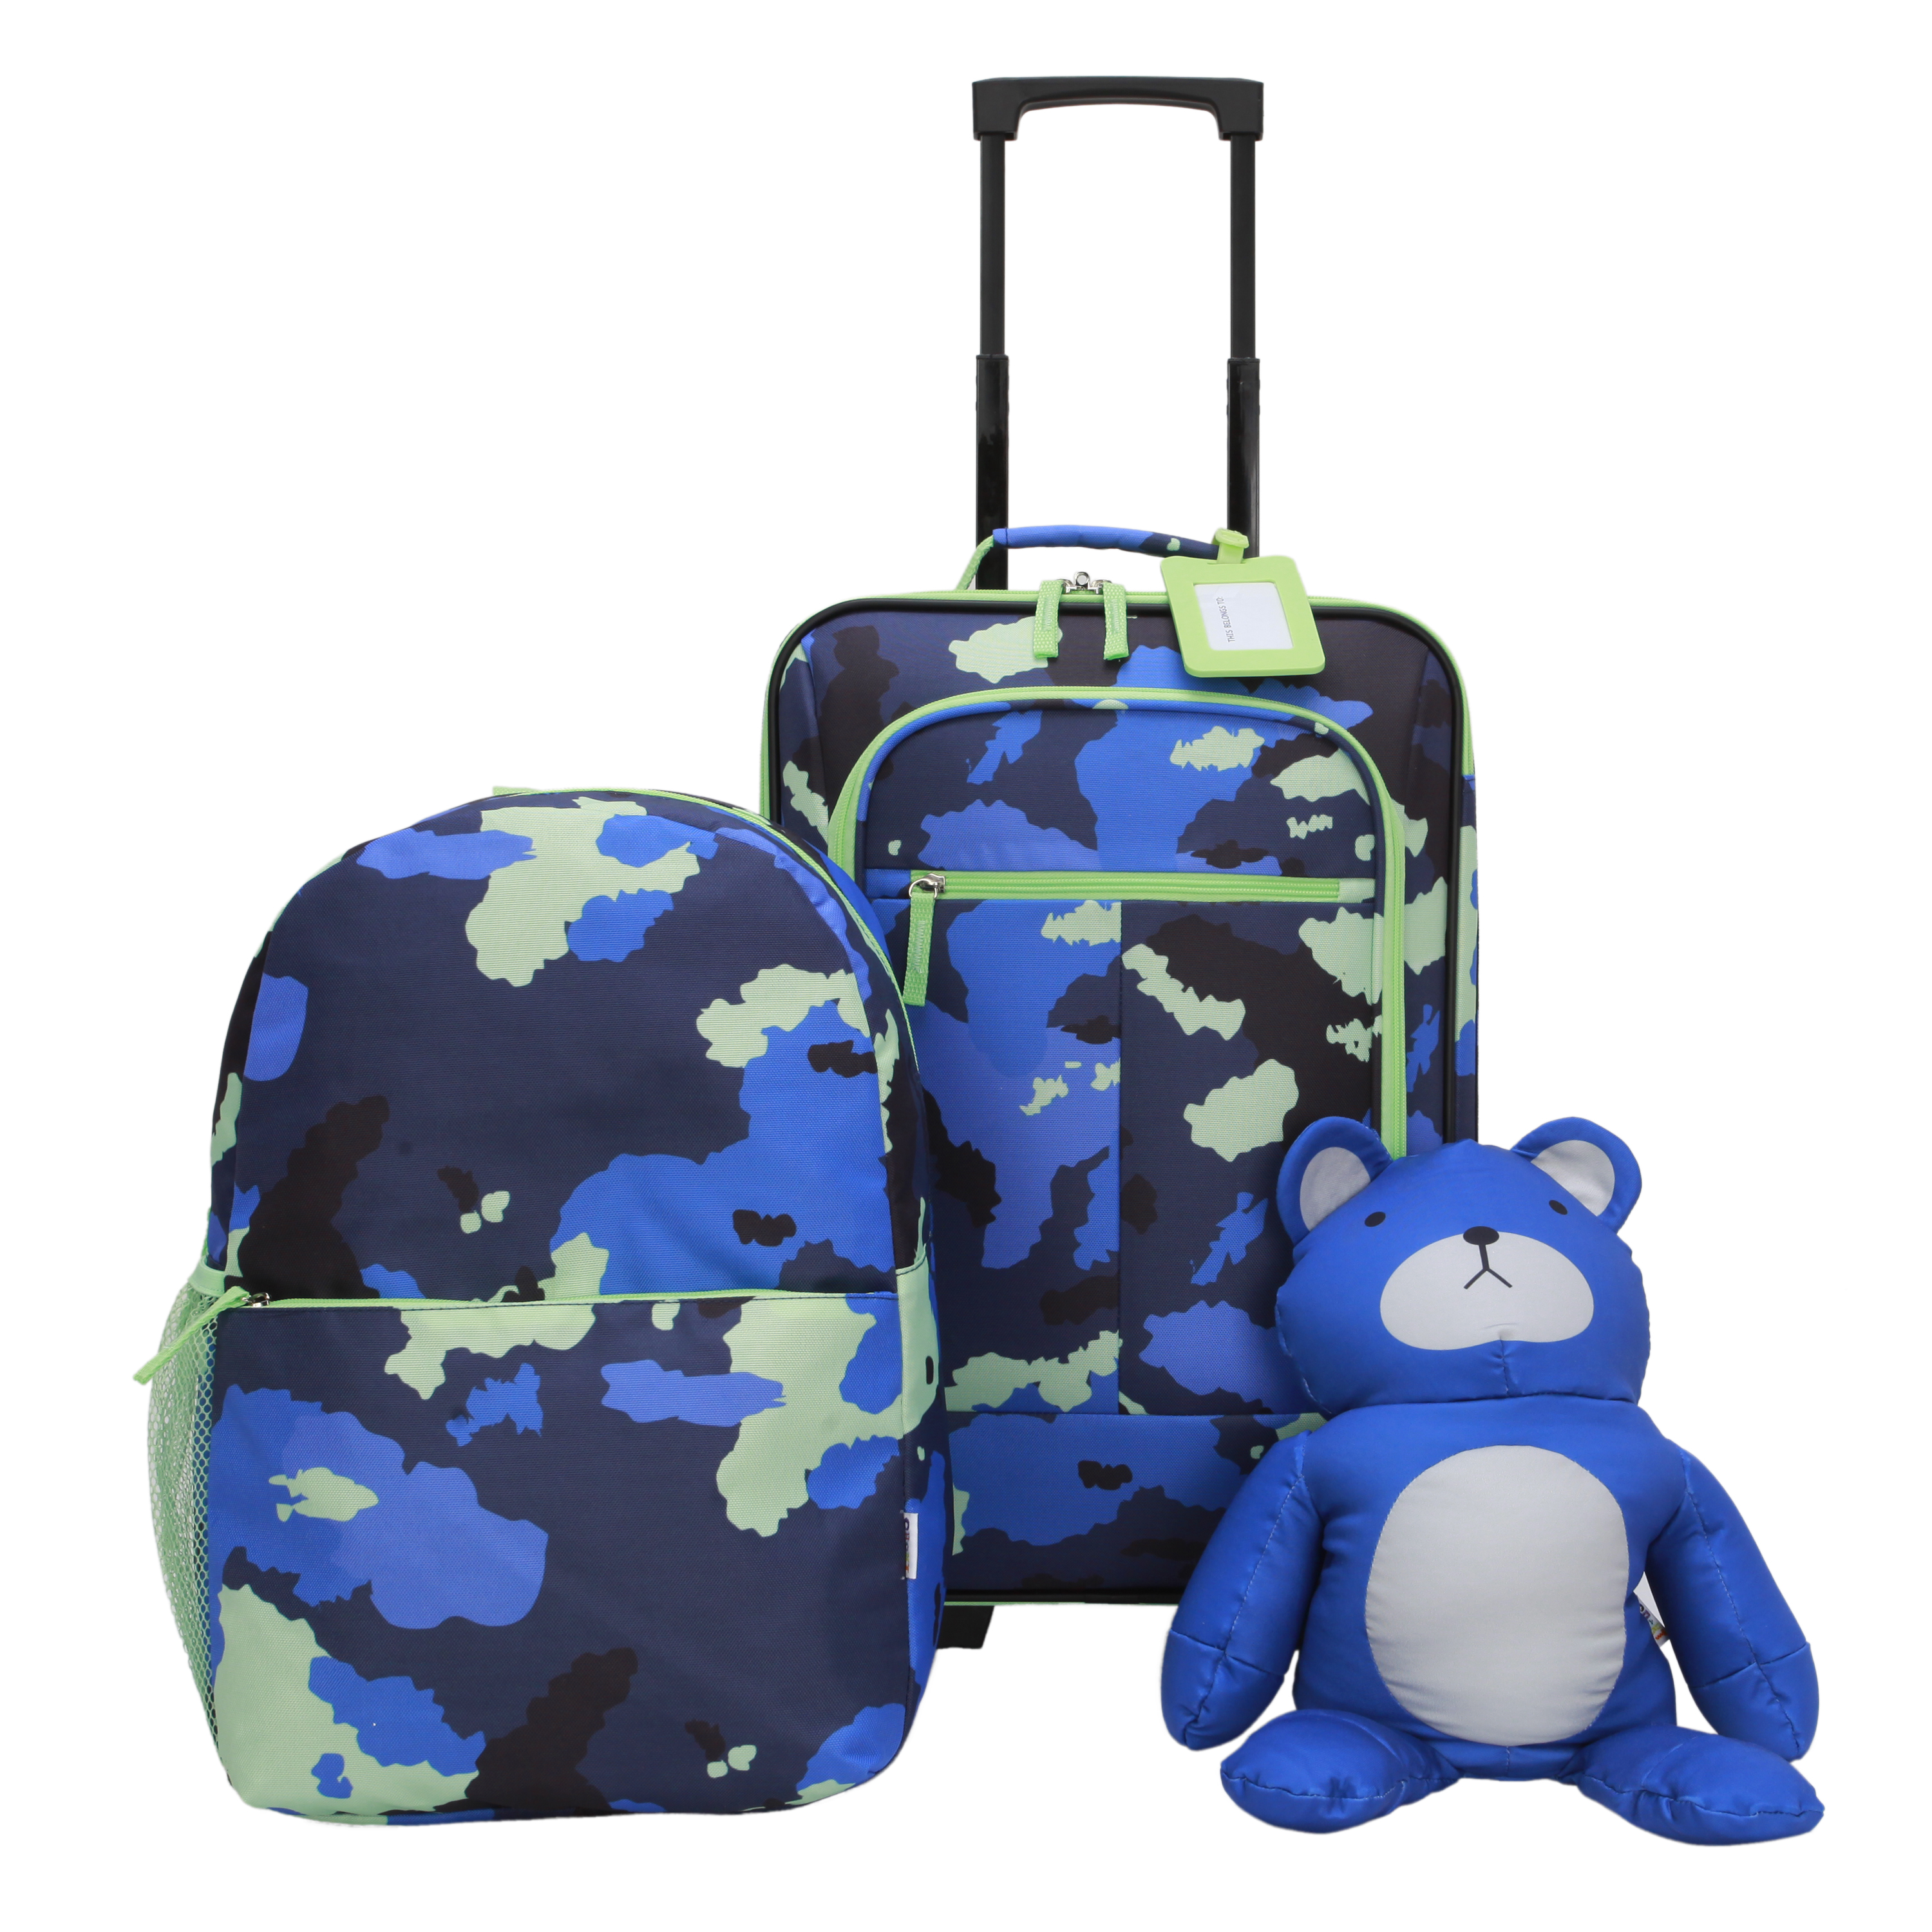 CRCKT 4 Piece 18-inch Soft side Carry-on Kids Luggage Set, Blue Camo - image 1 of 23